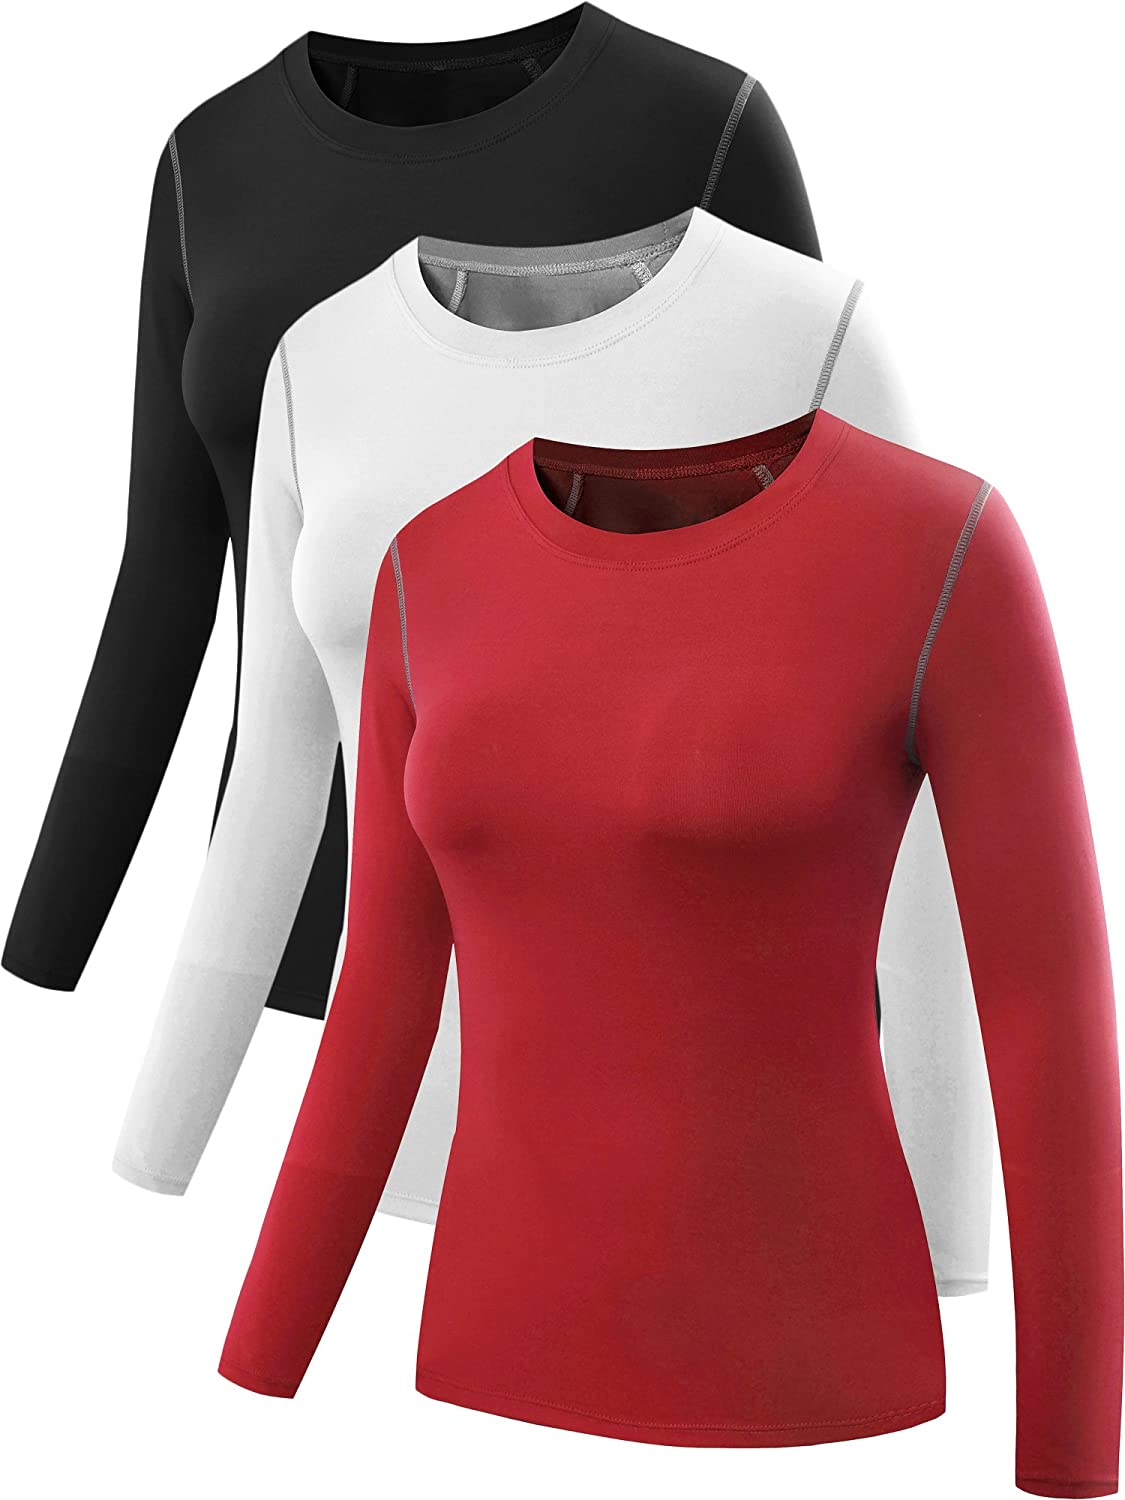 Neleus Women's 3 Pack Dry Fit Athletic Compression Long Sleeve T